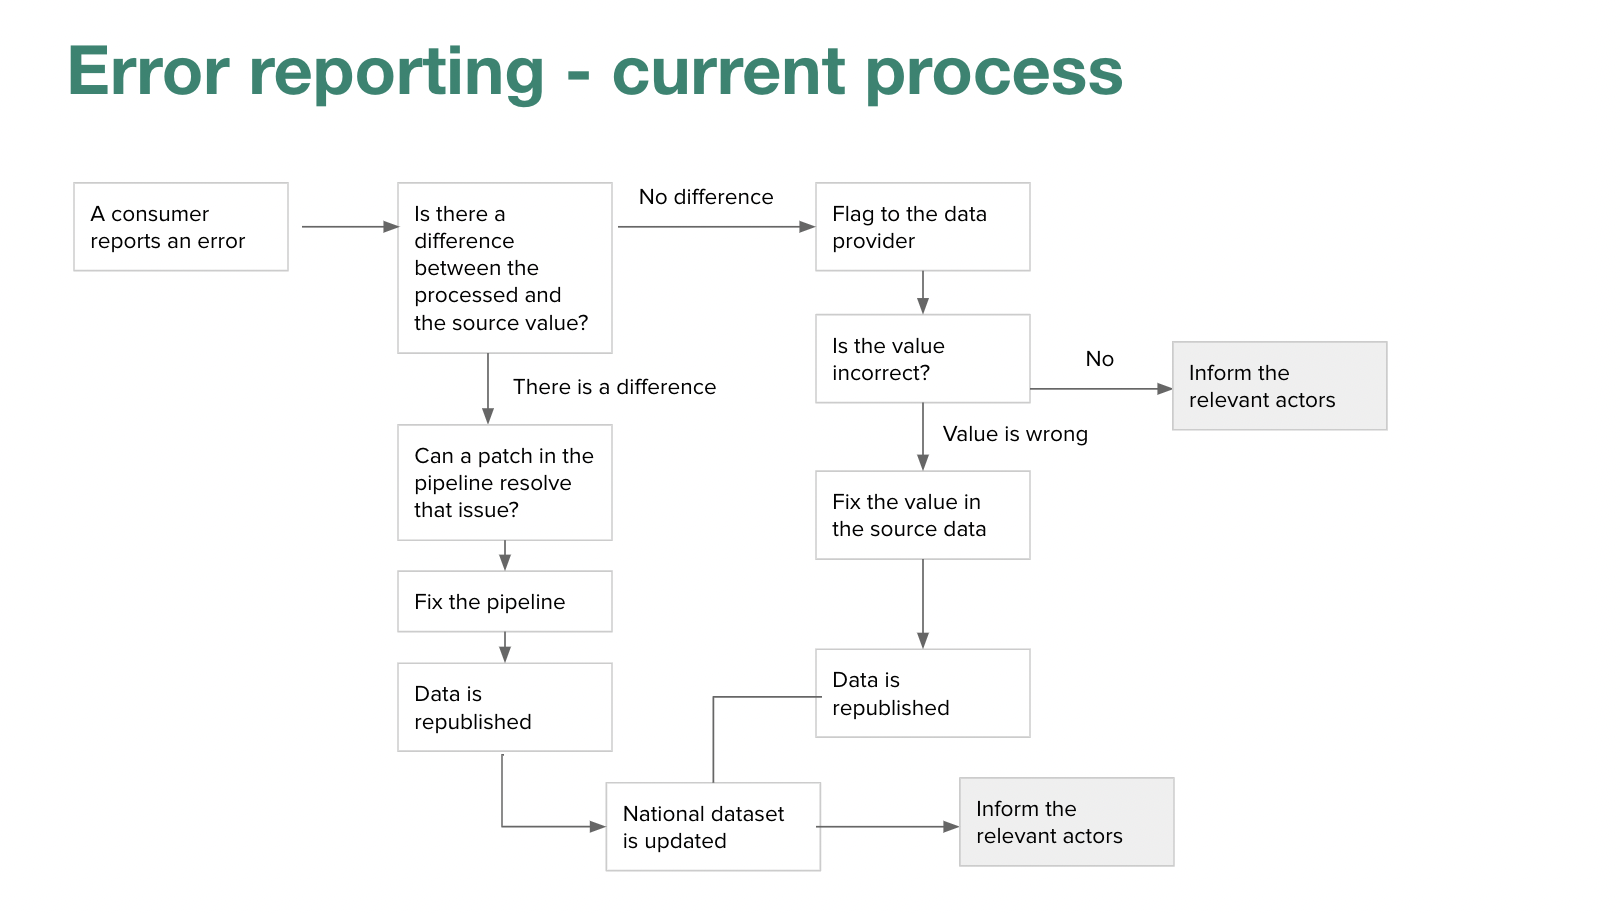 diagram of the current error reporting process